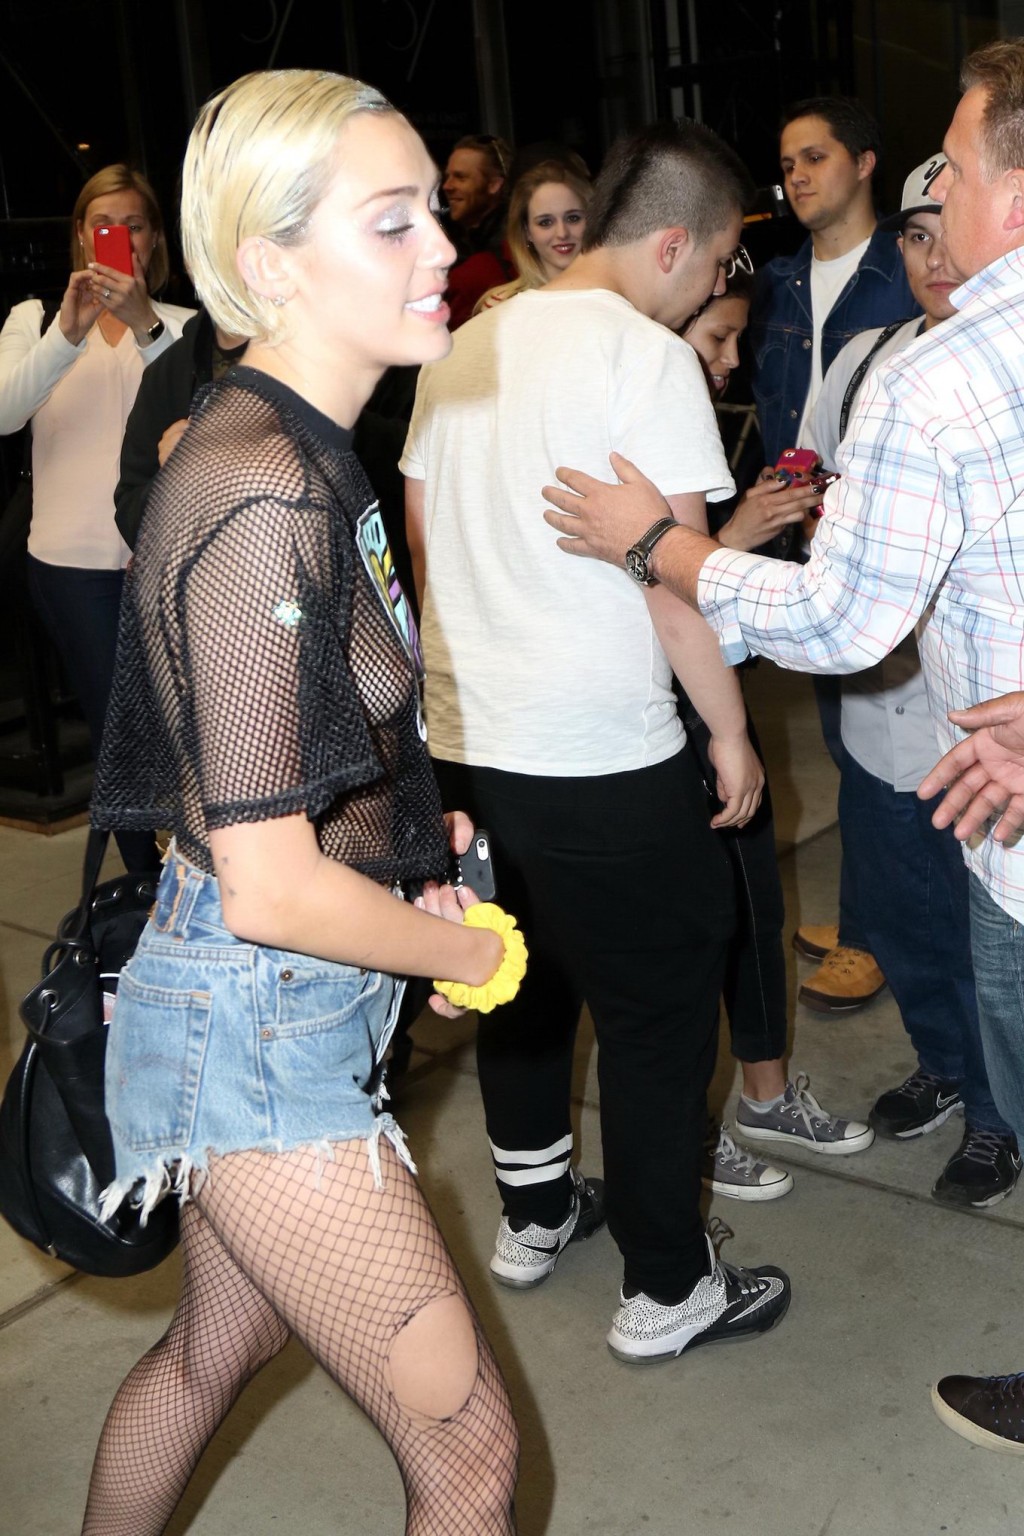 Miley Cyrus shows off her boobs wearing a mesh Tshirt out in NYC #75164202